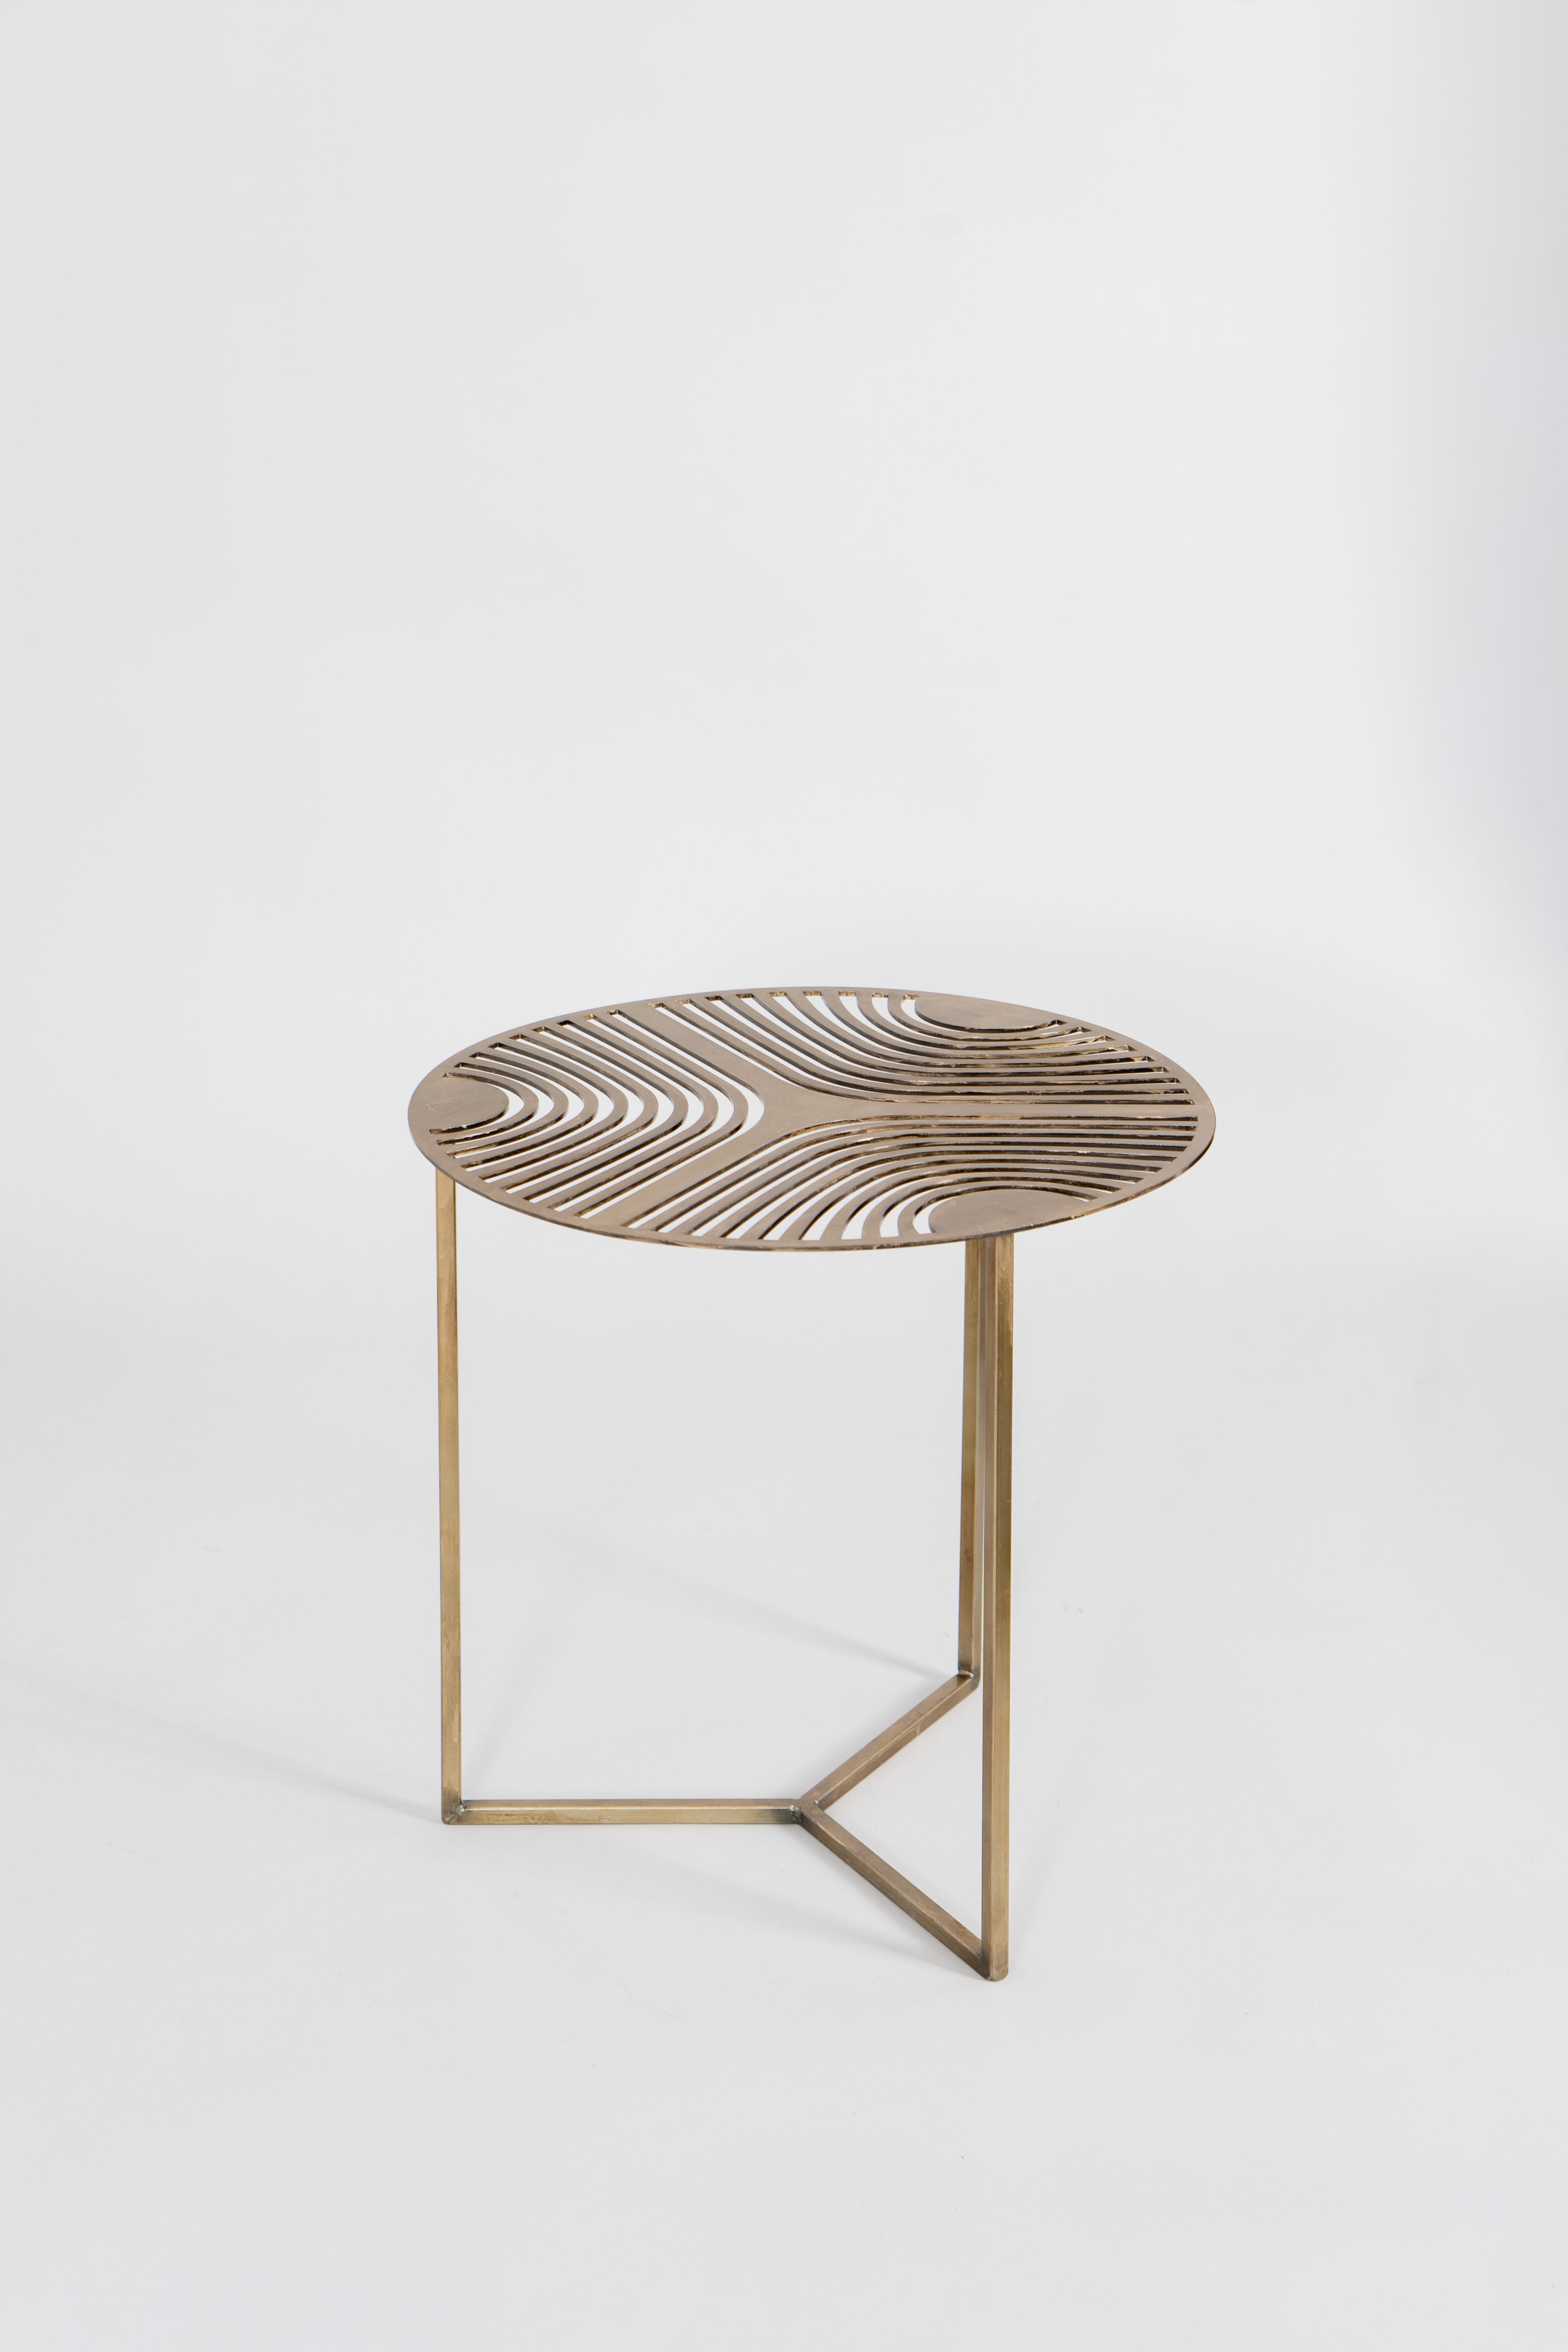 The Armonic tables constitute a family of sound tables, each distinguished by a range of sounds reflecting the geometric process that generated them. A visible path guides the transformation from one shape to another, from the center outward and